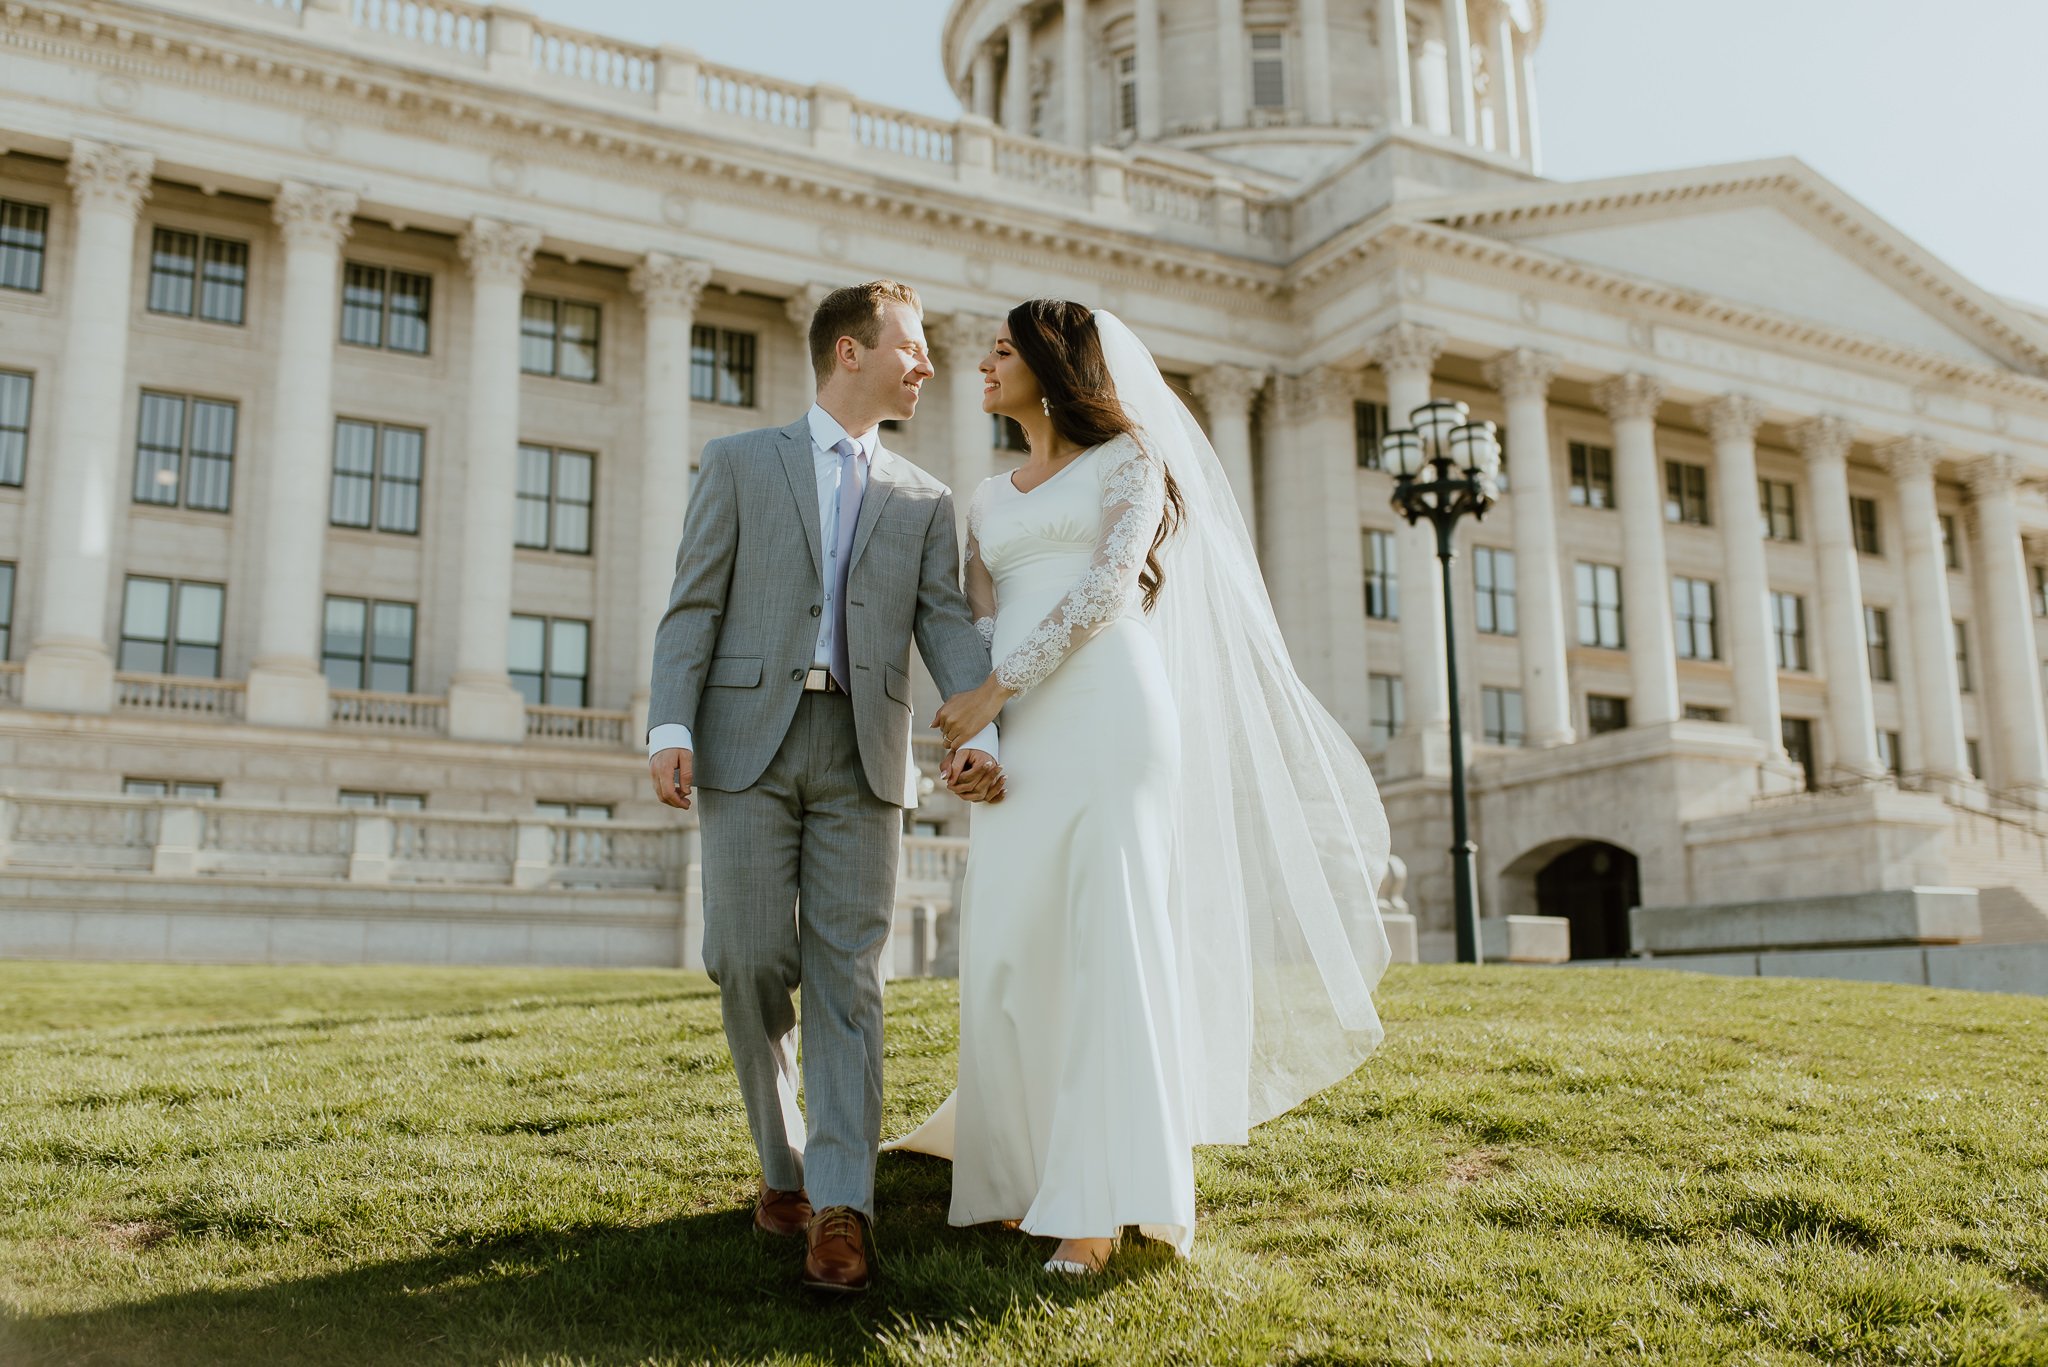 Utah-State-Capitol-Spring-Blossons-Bountiful-LDS-Wedding-Hopesandcheers-photo-18